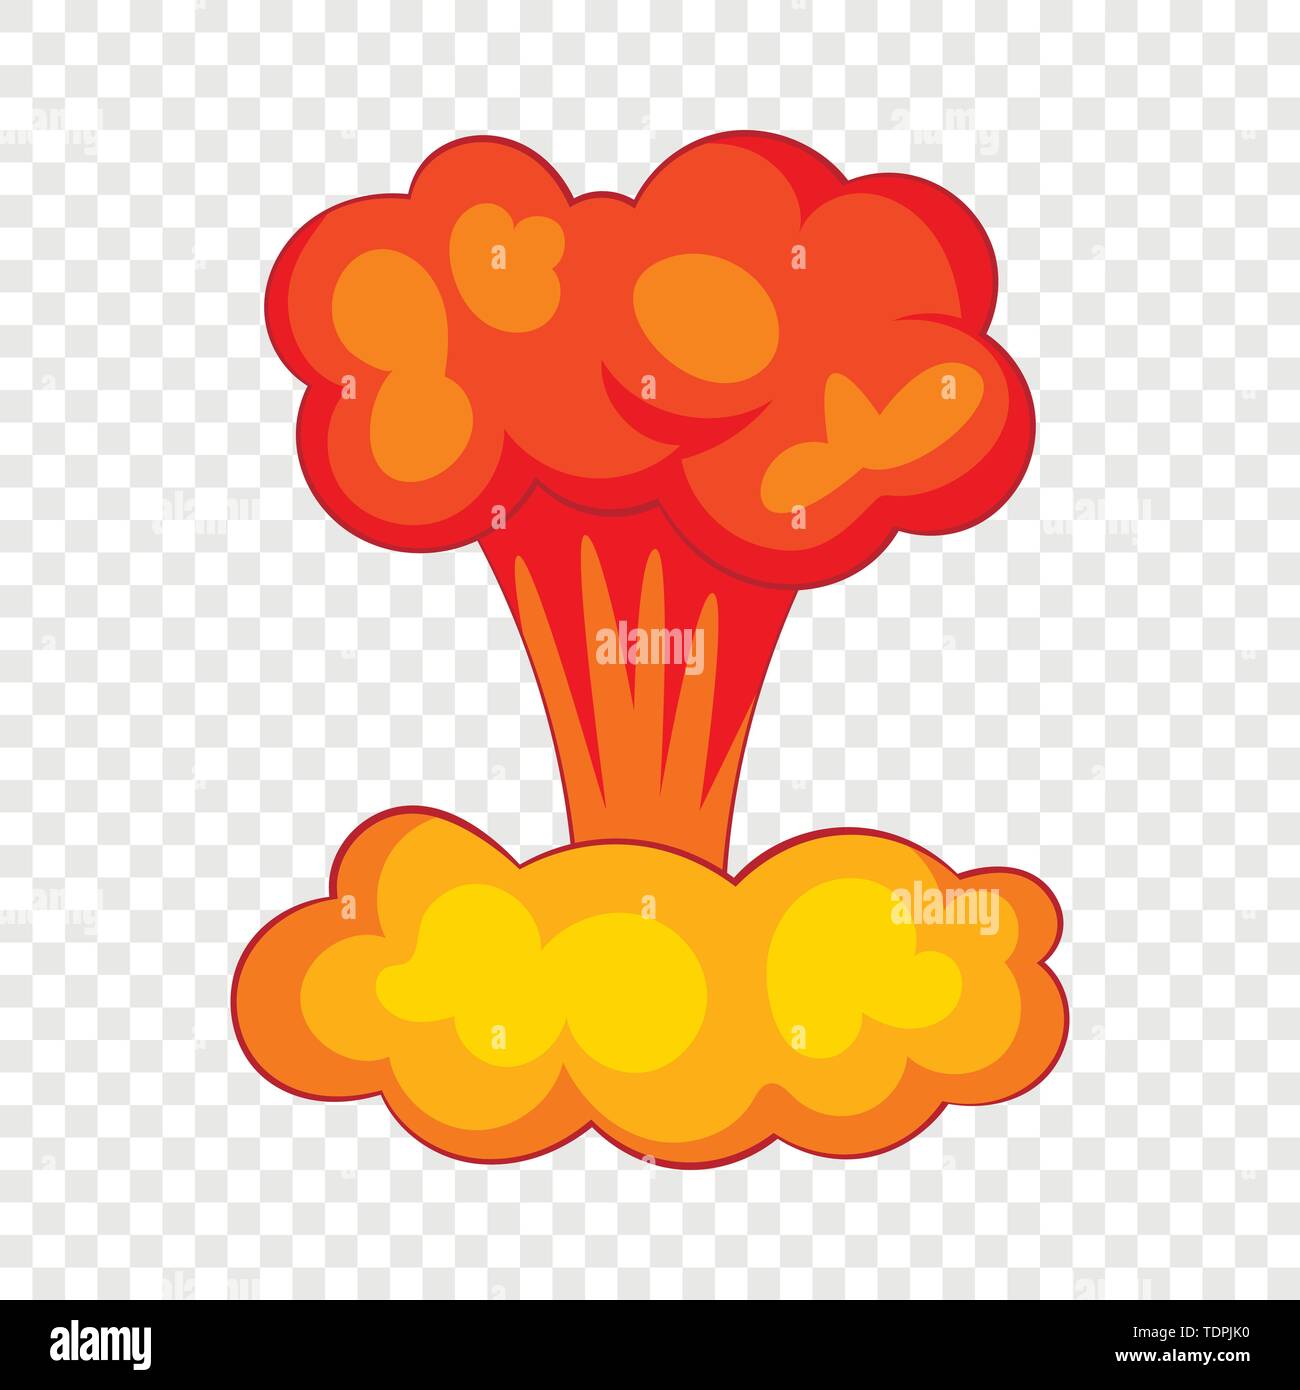 Cartoon Atom Bomb High Resolution Stock Photography and Images - Alamy